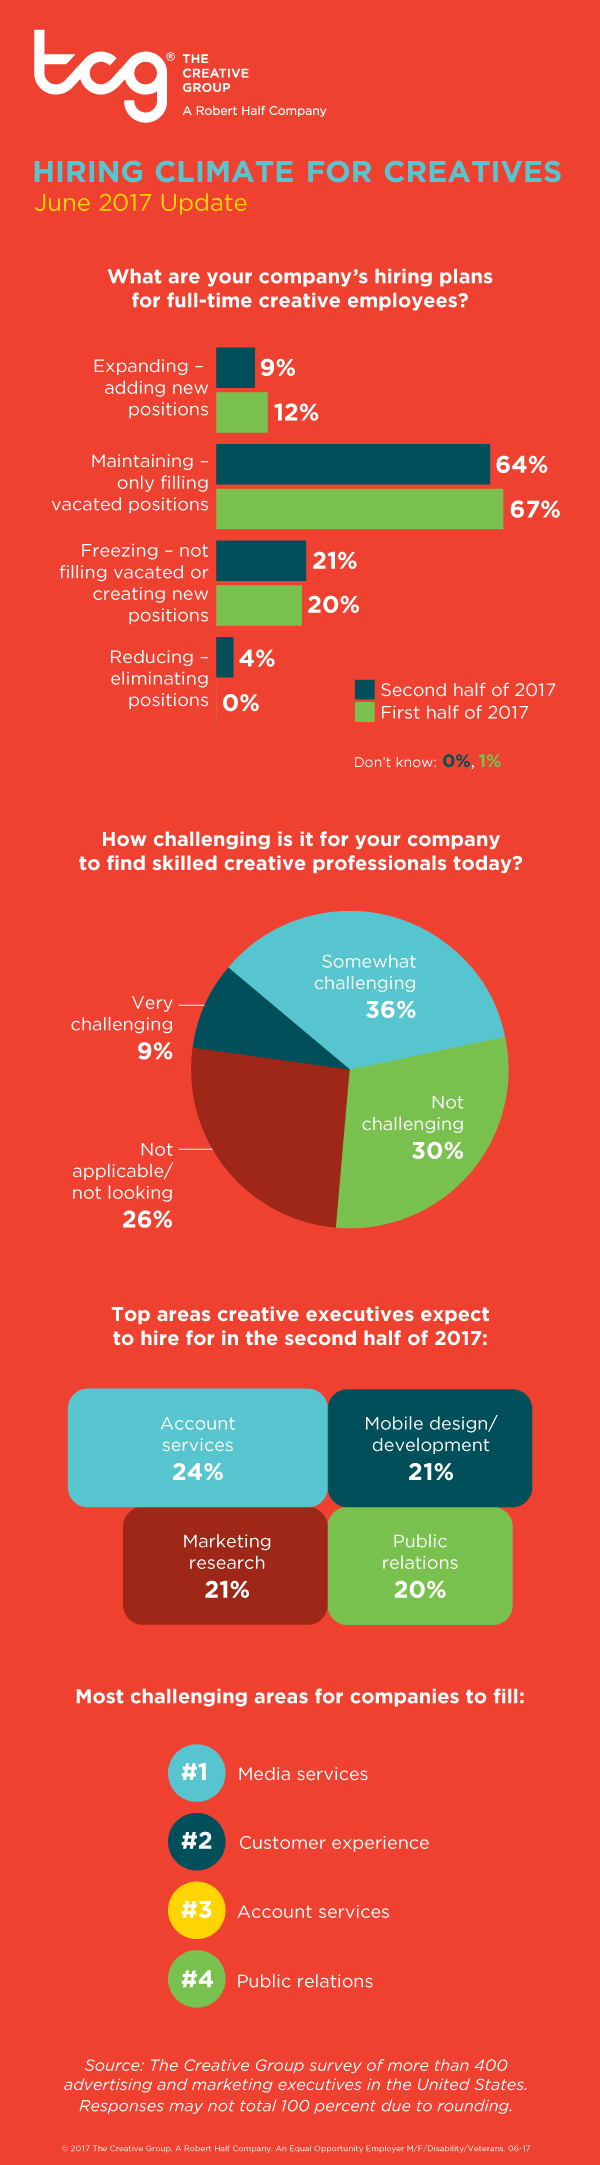 The Creative Group Hiring Climate Infographic